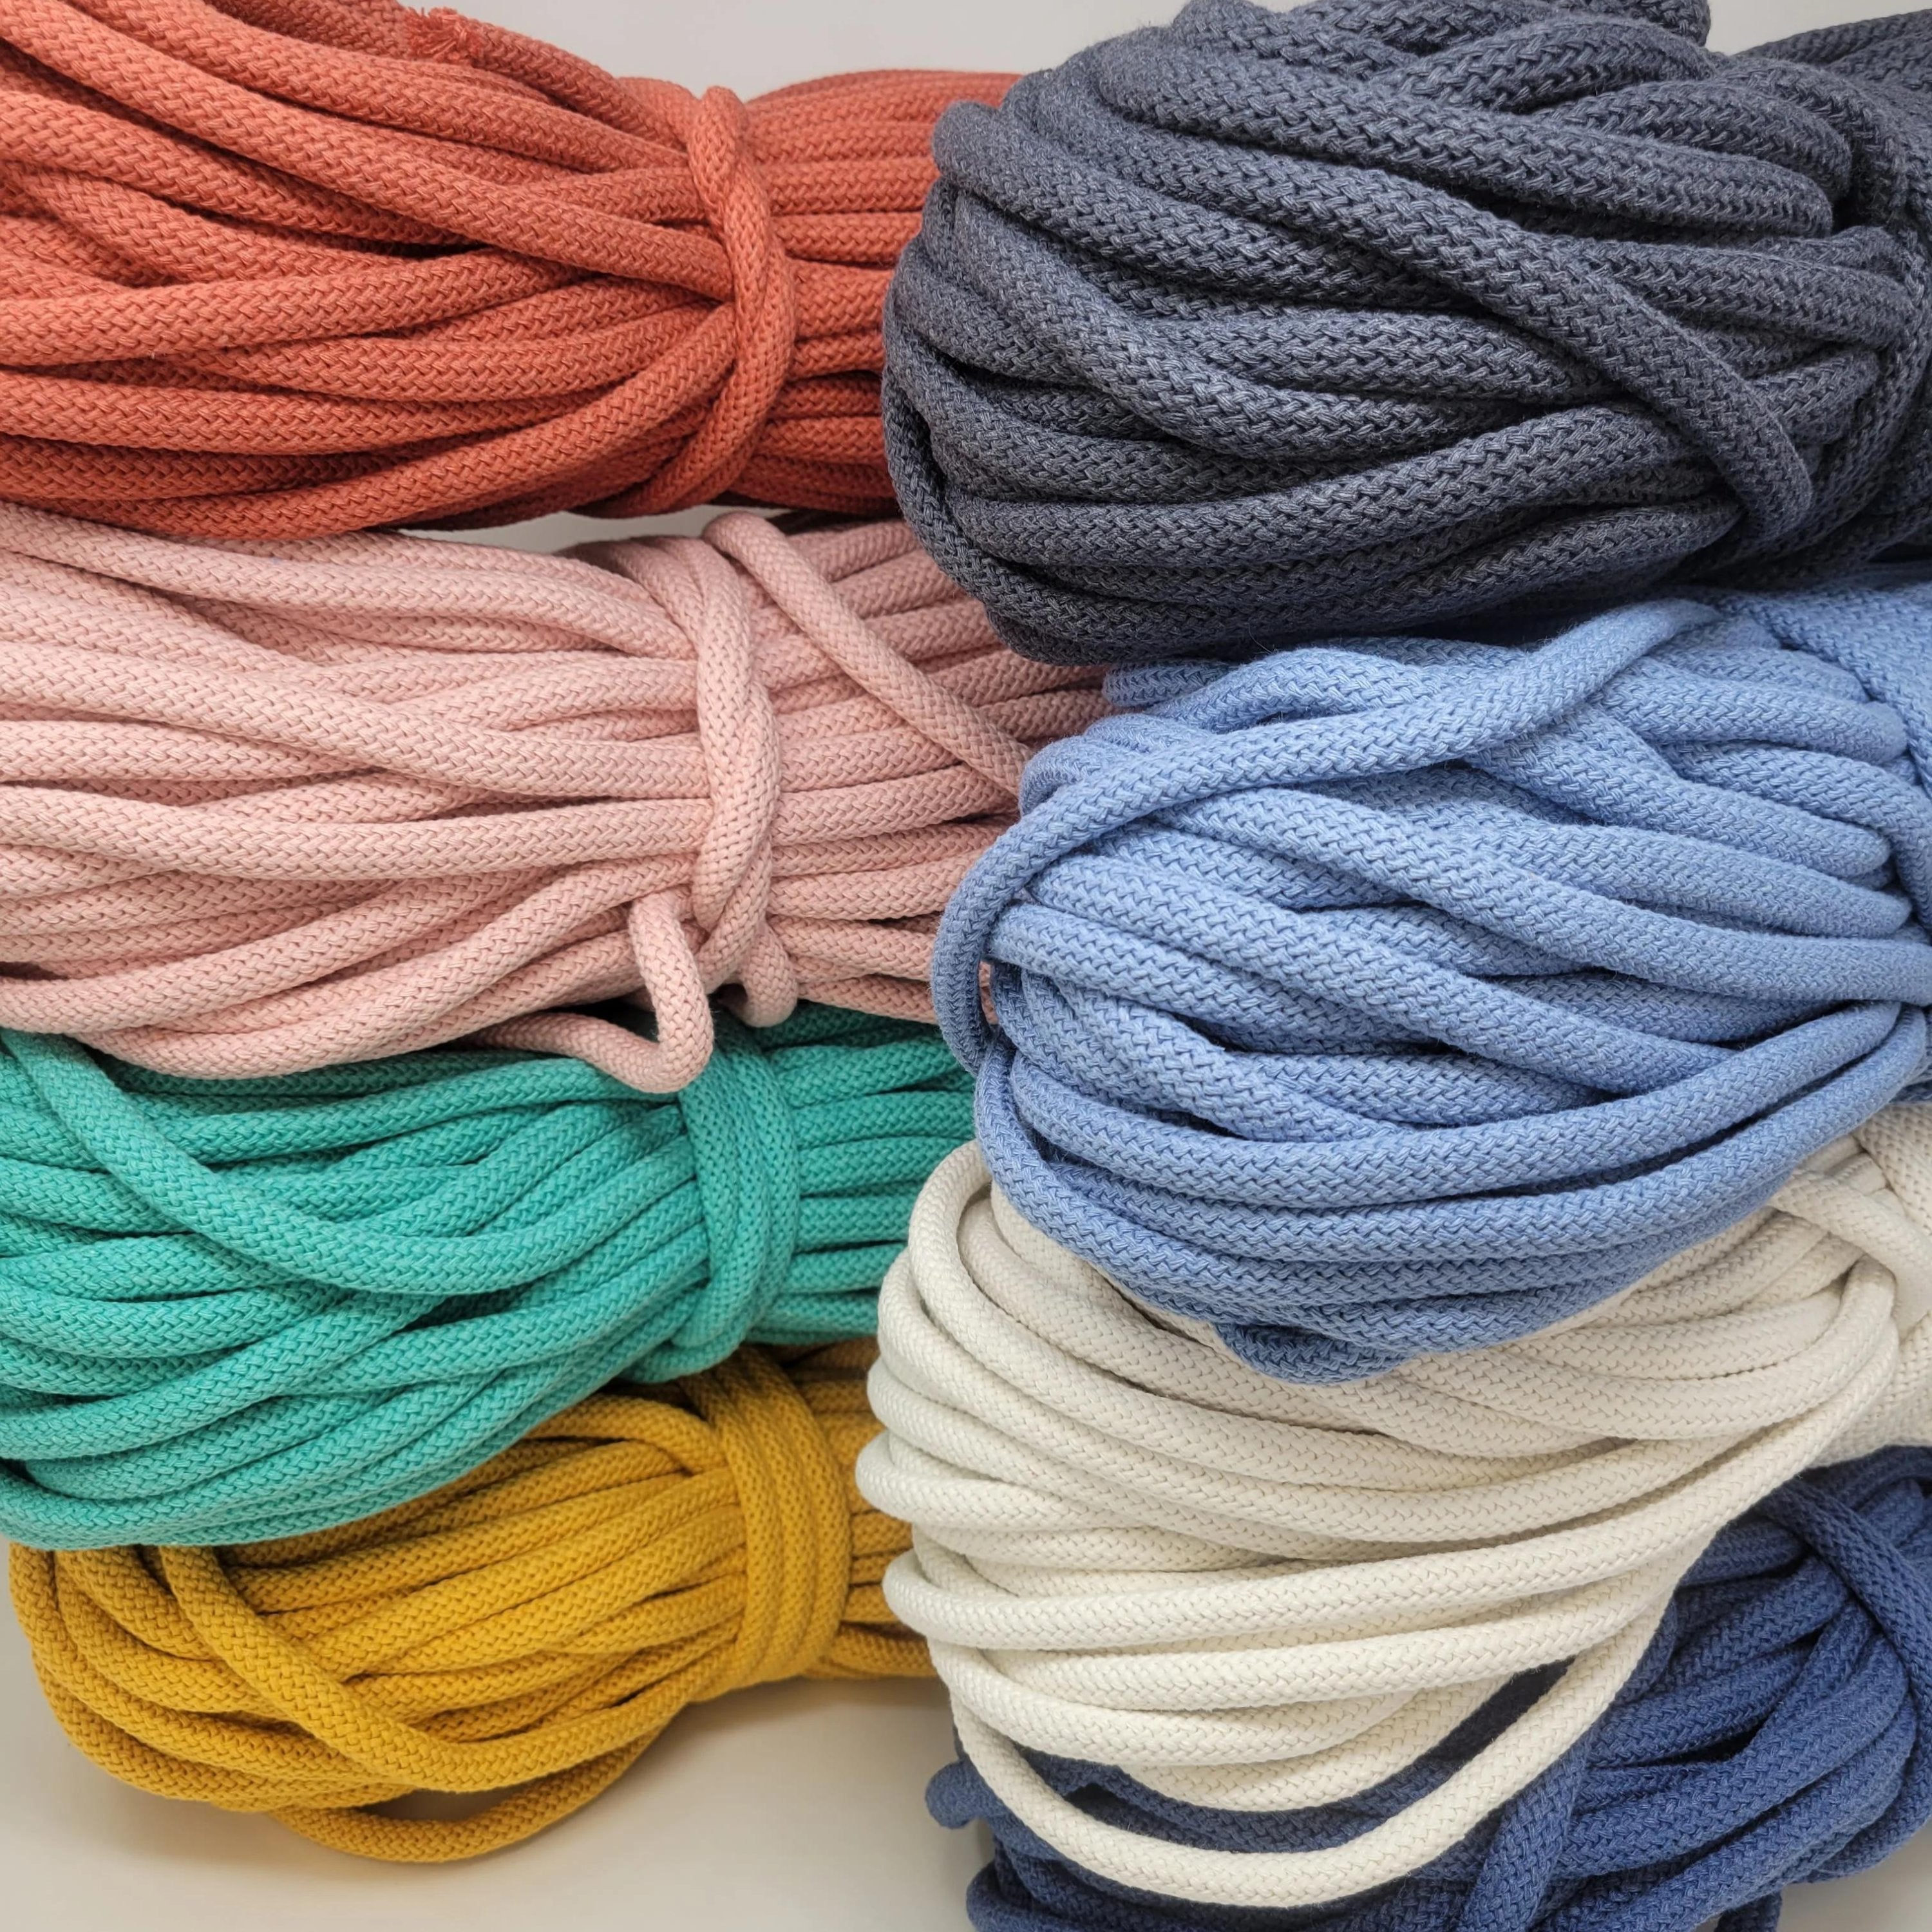 Cotton Twine Cords Macrame Rope String Thread for Cooking